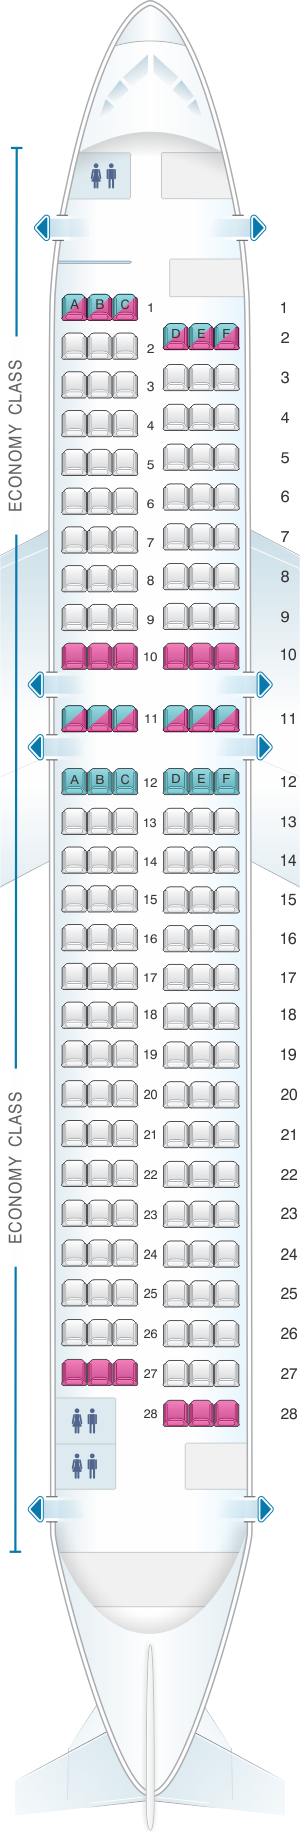 Seat map for Asiana Airlines Airbus A320 200 159PAX